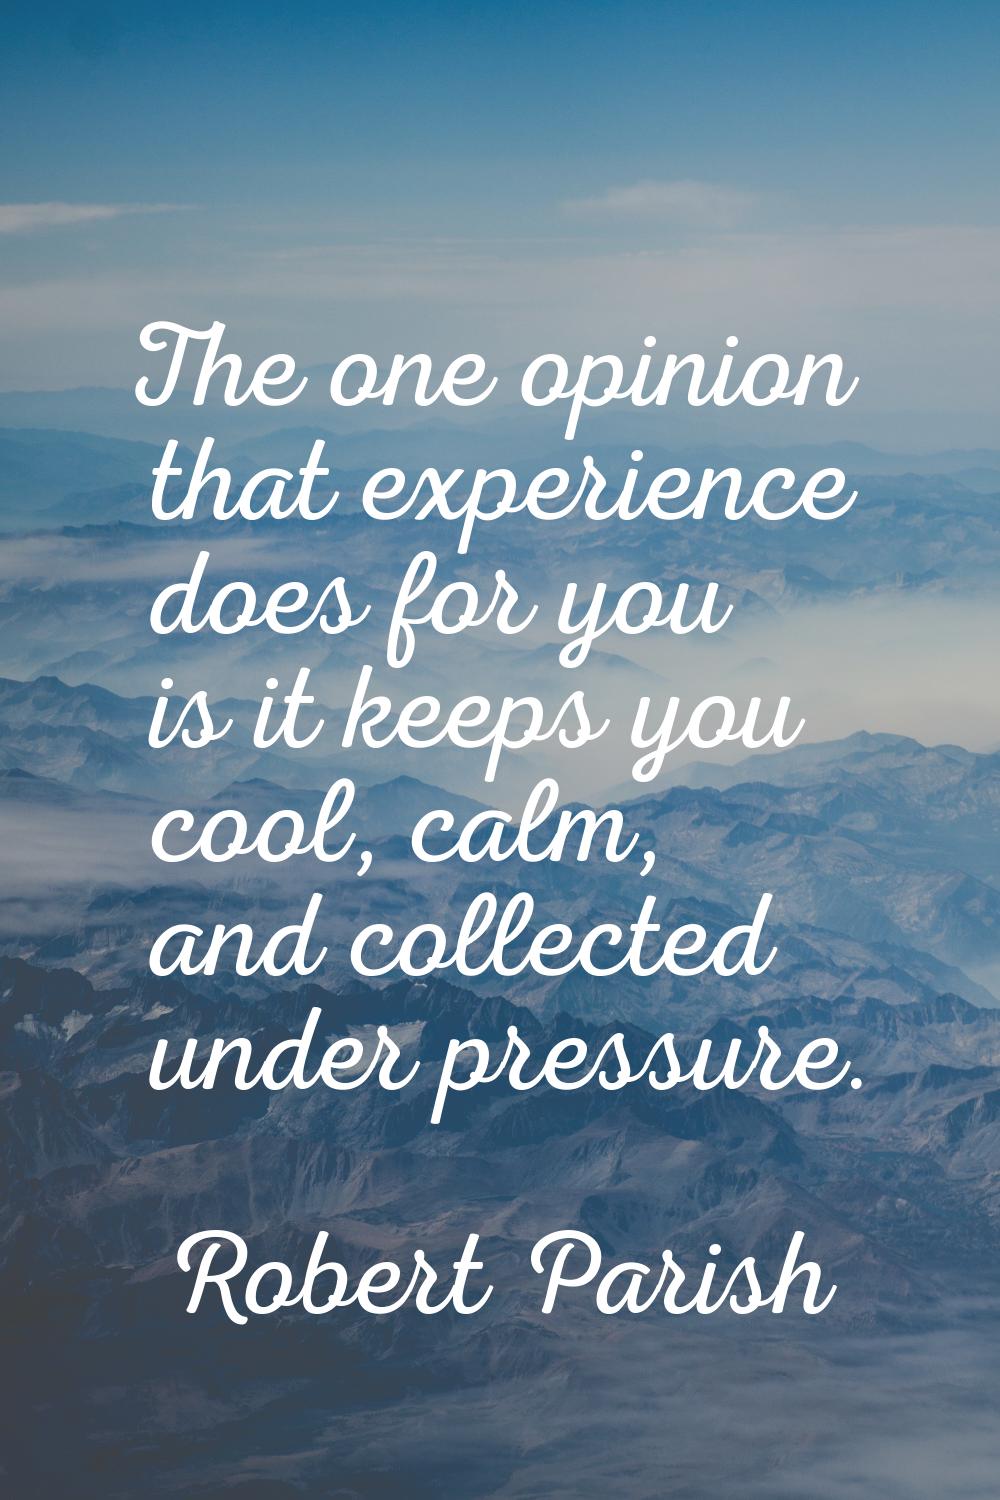 The one opinion that experience does for you is it keeps you cool, calm, and collected under pressu